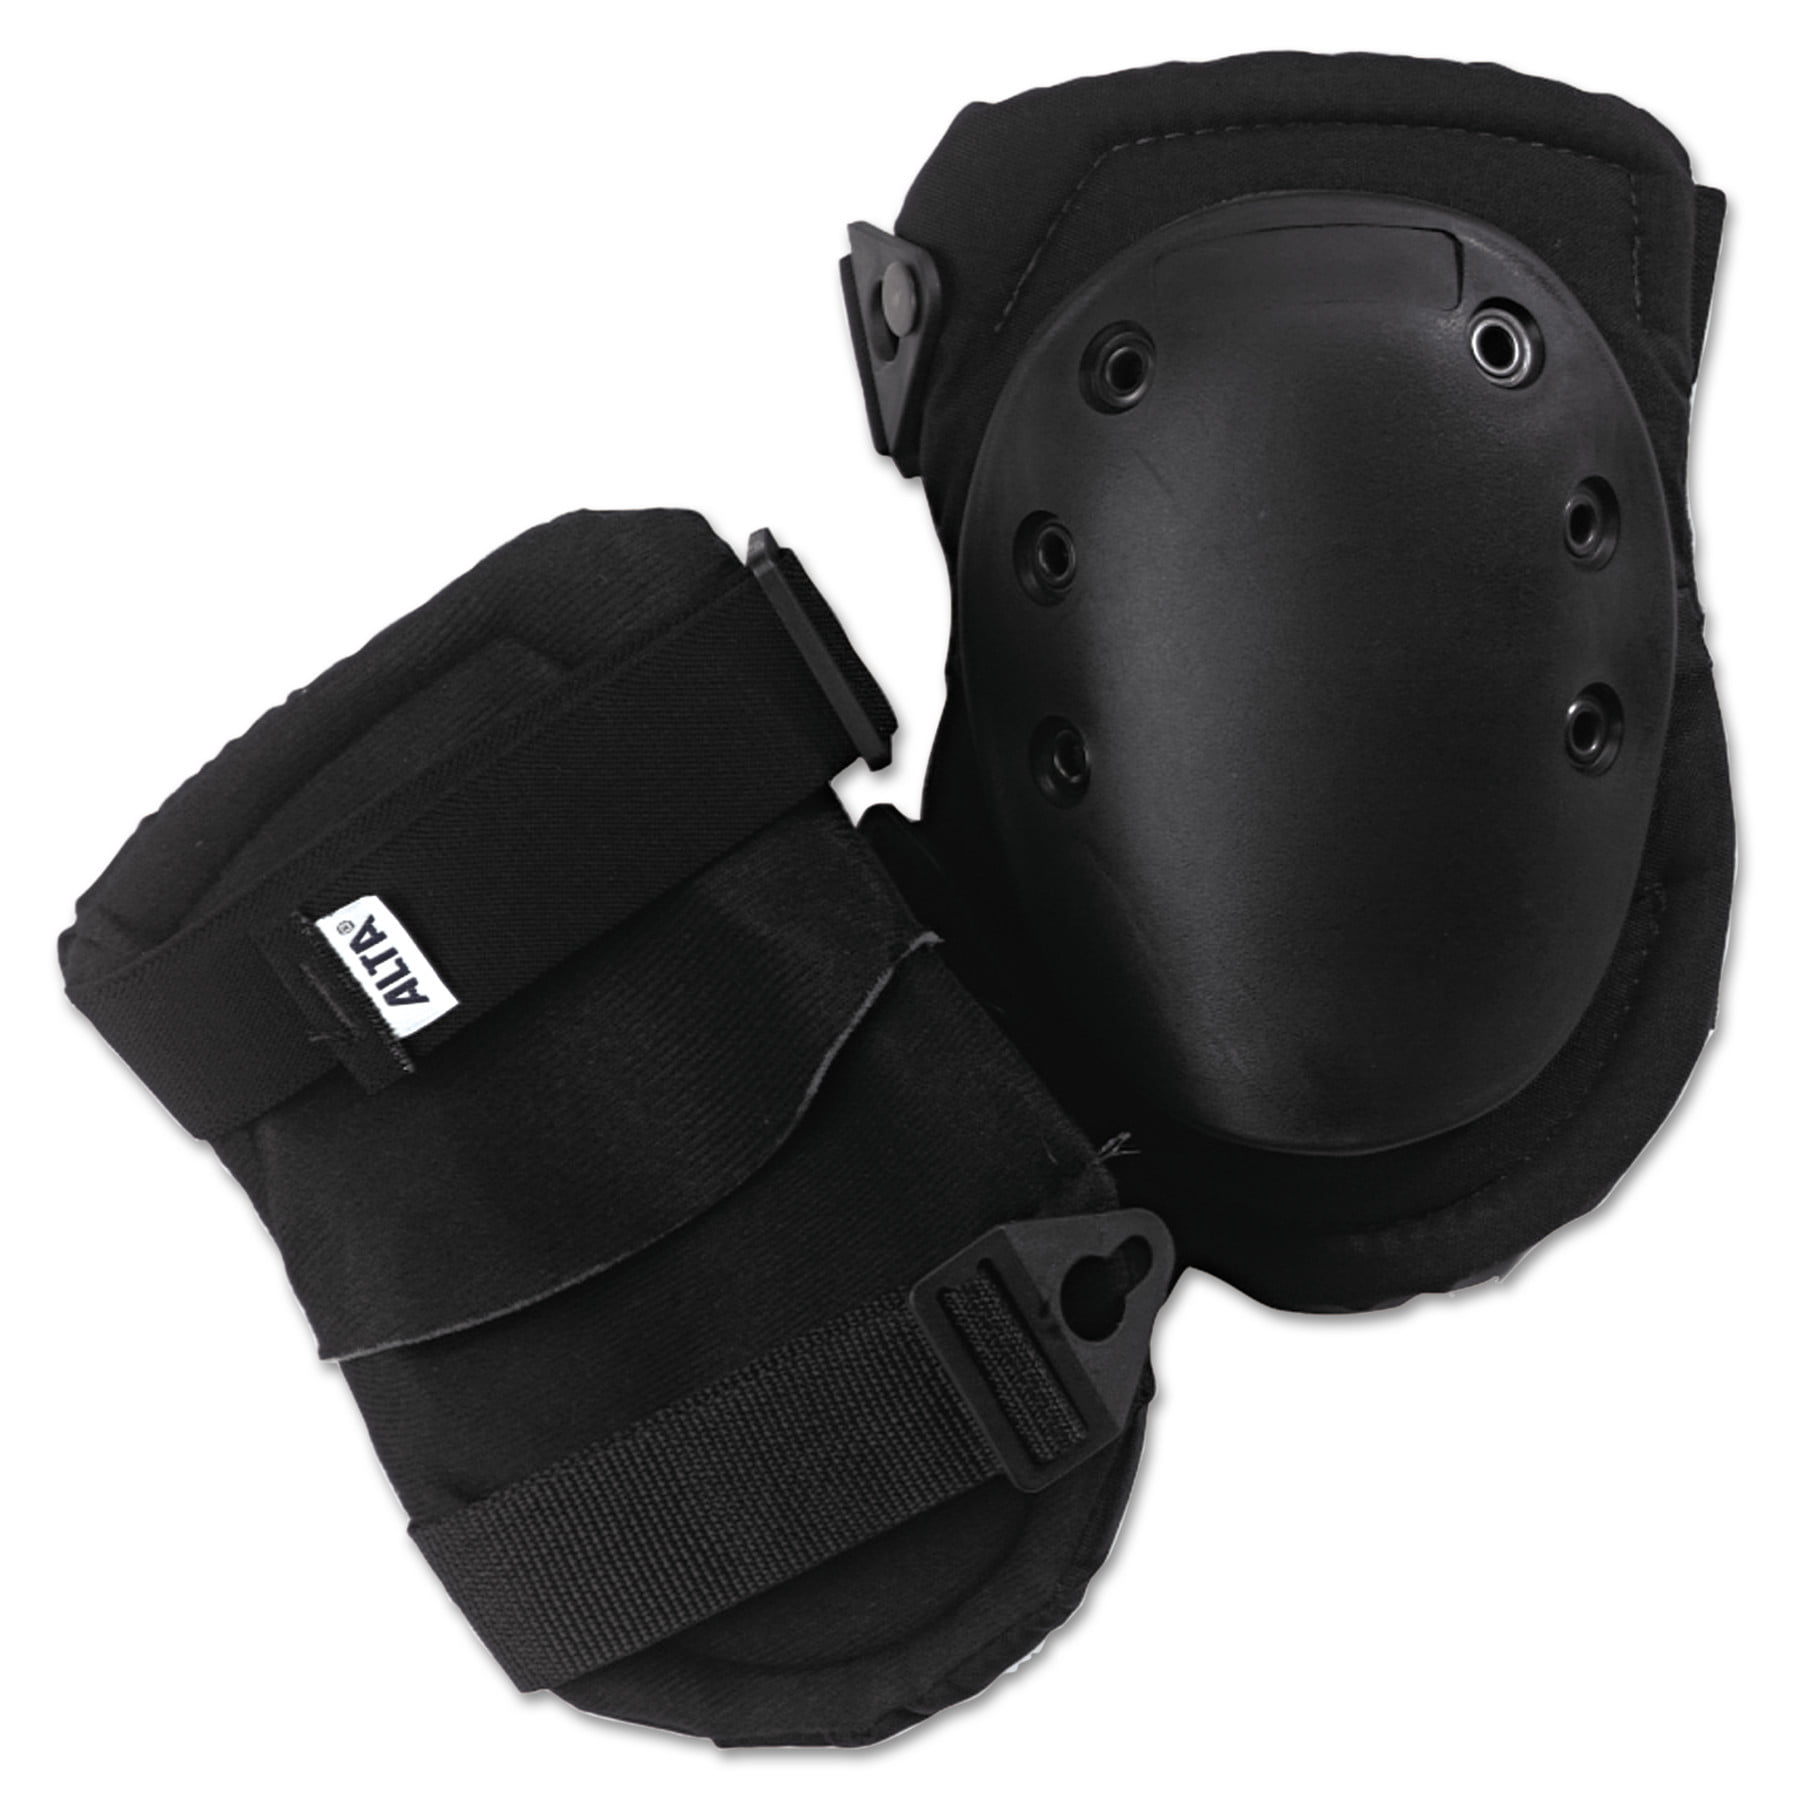 Pair of Leather Knee Pads Riveted for Strength plus Double Padding for Comfort 